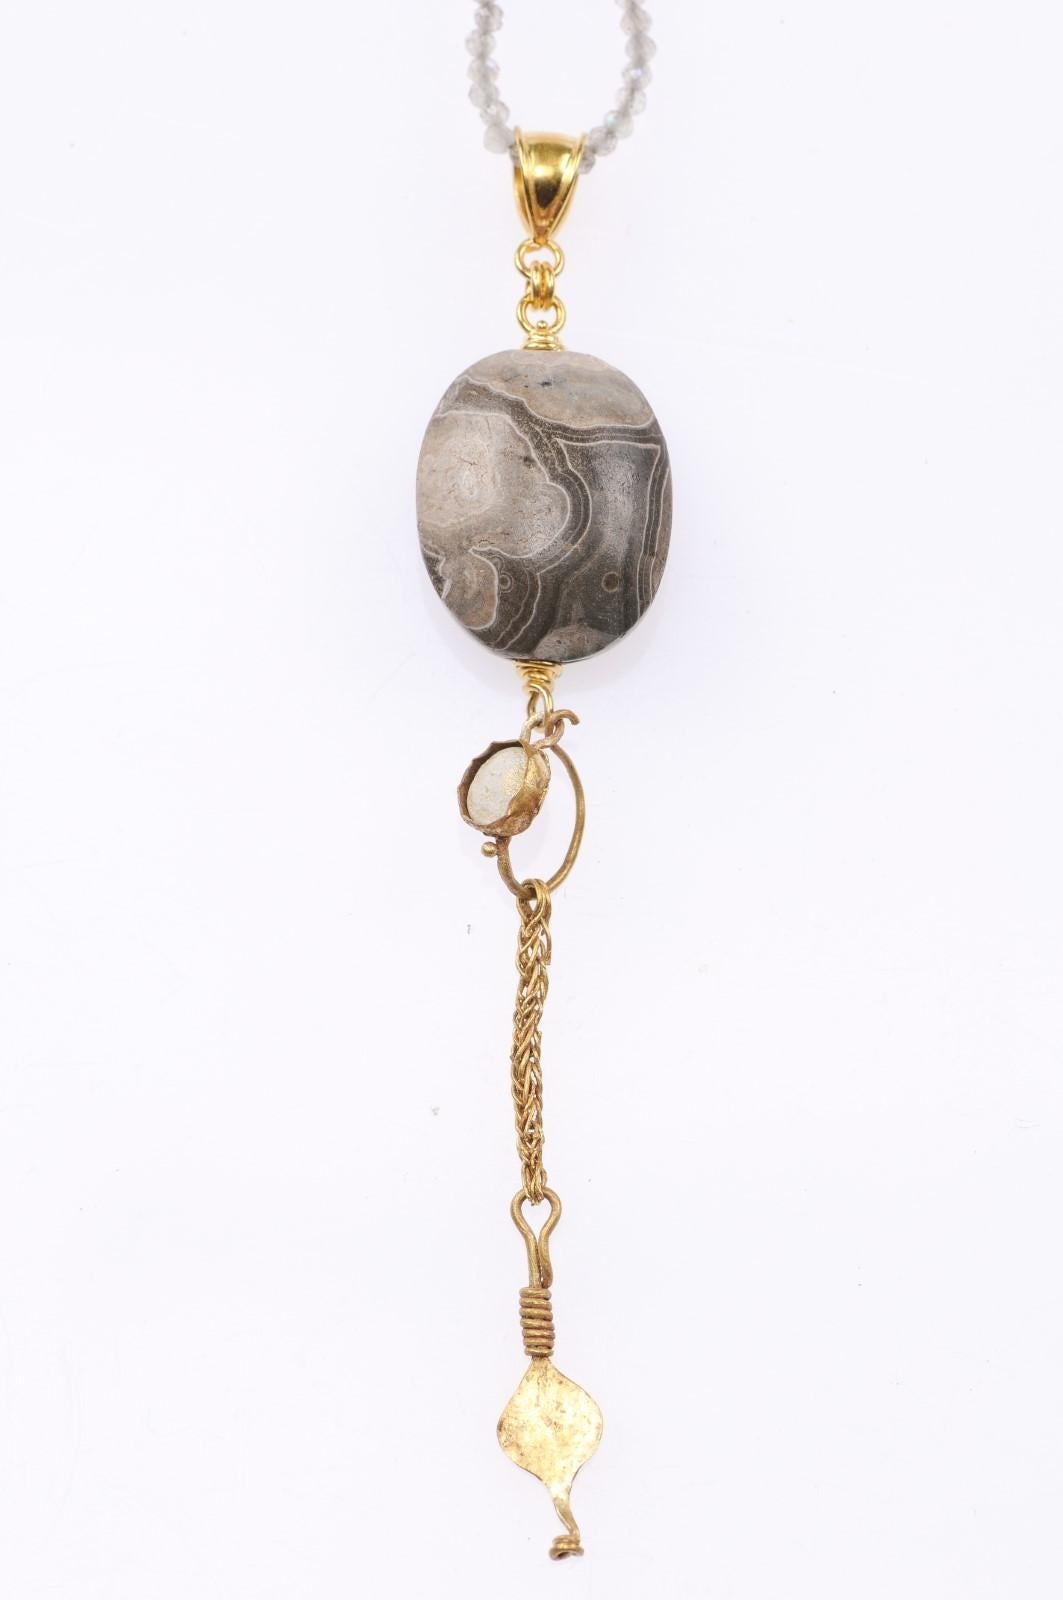 A Sumerian agate scaraboid (circa 2000 BC) set into a custom 21 Kt gold pendant with dangling embellishment being that of a Roman gold earring with glass (circa 1st to 3rd century BC), and 21 kt gold bail. Measurements are: 3 5/8